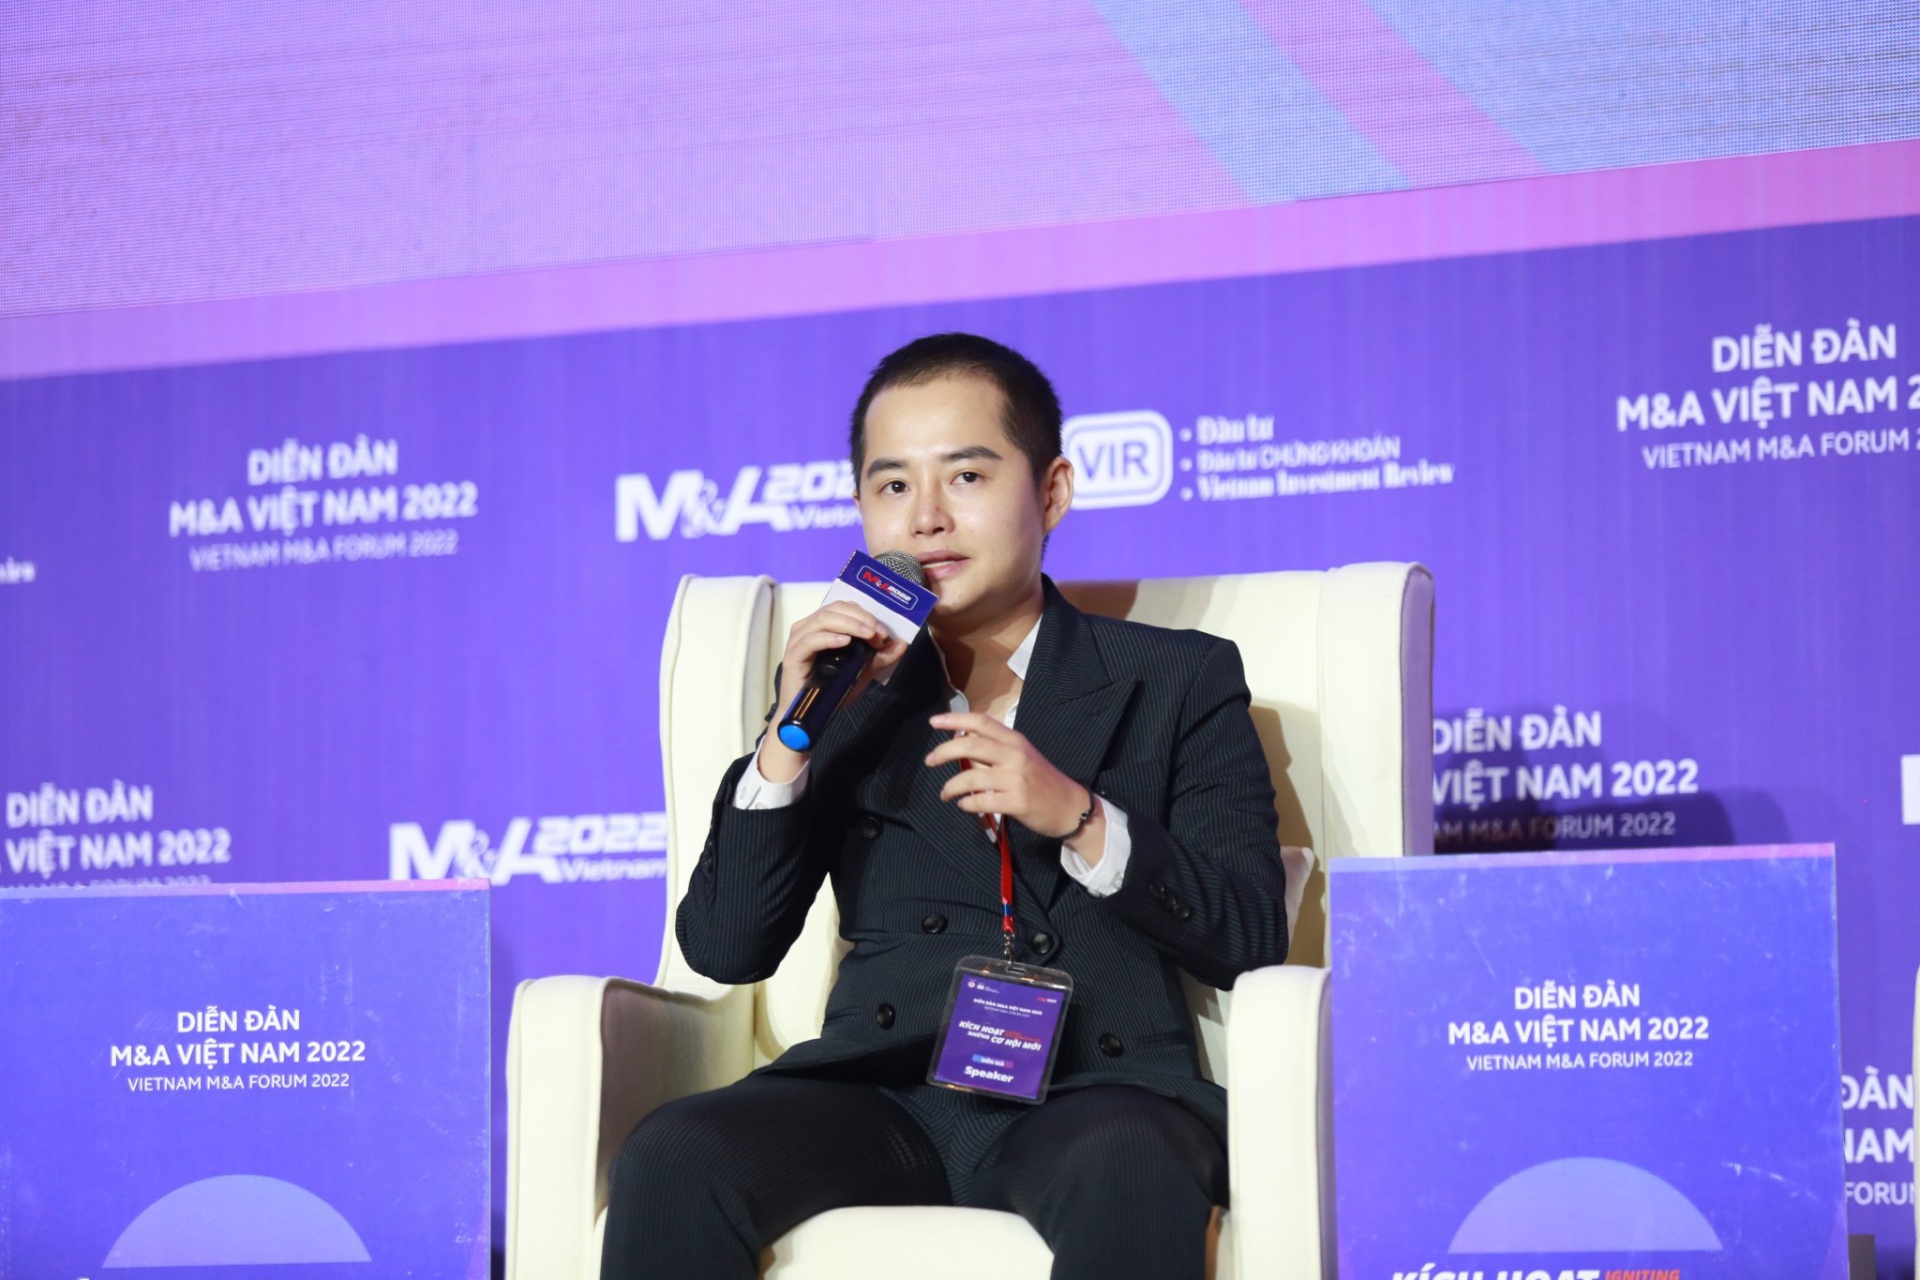 “New Value Creation” session at Vietnam M&A Forum 2022